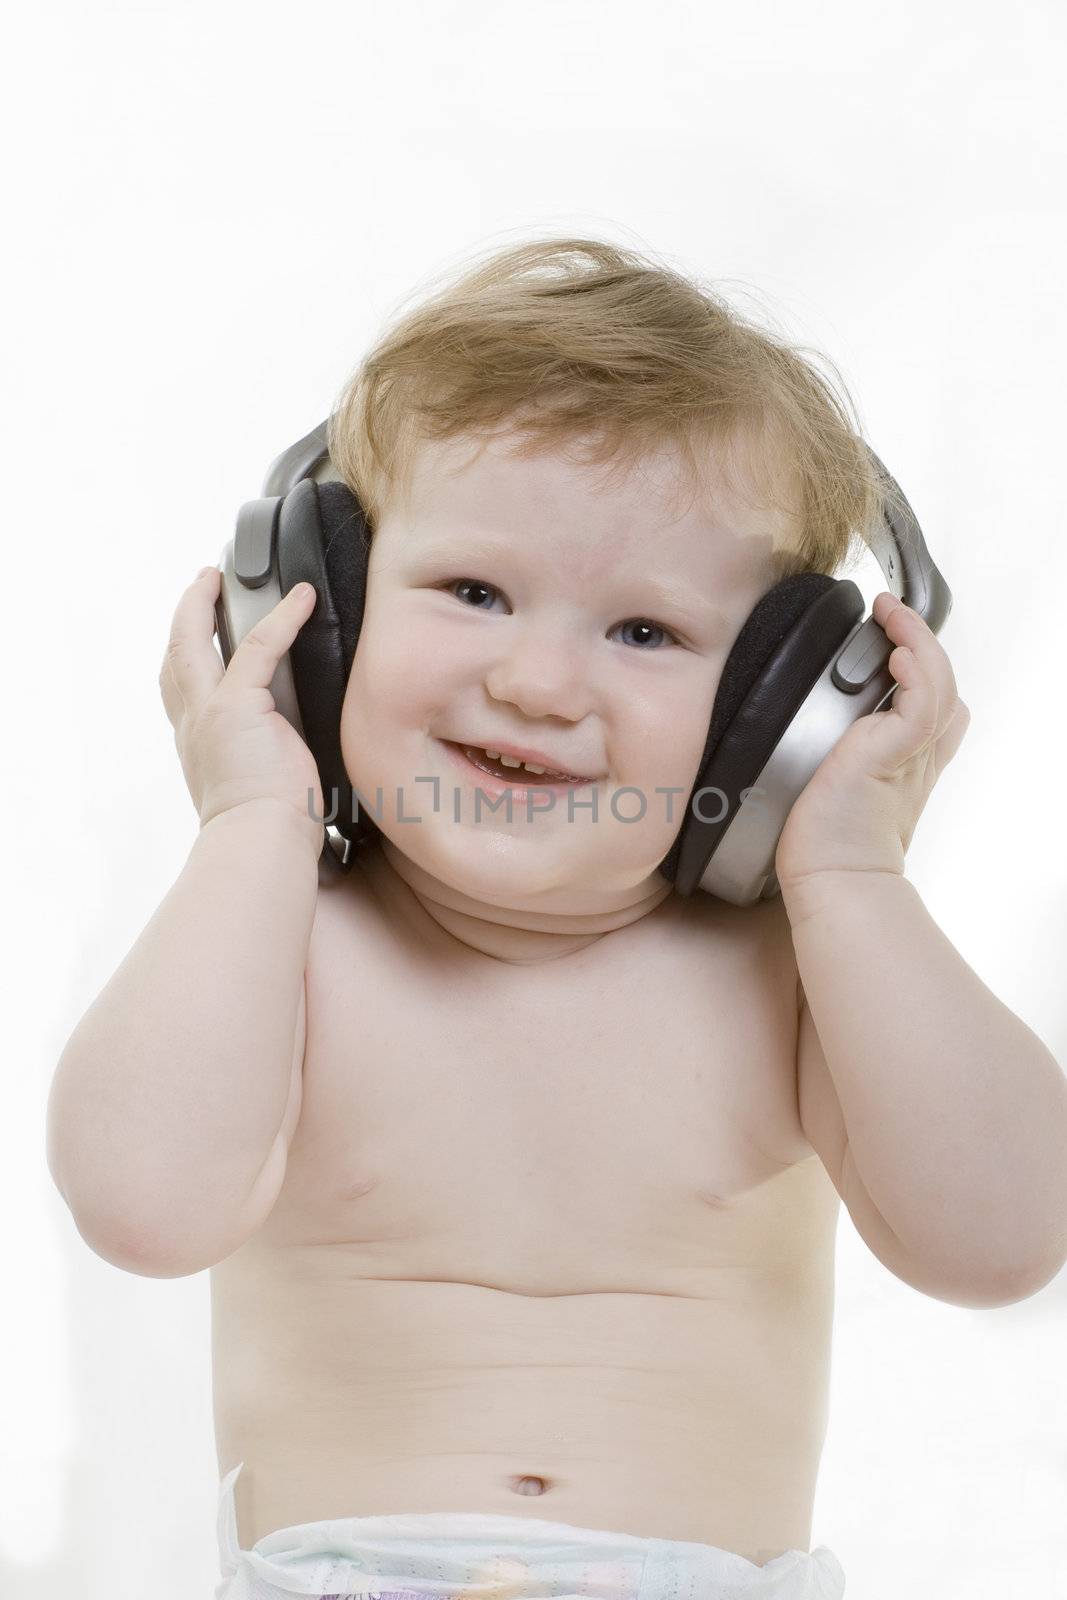 Smiling baby with headphones by Nobilior